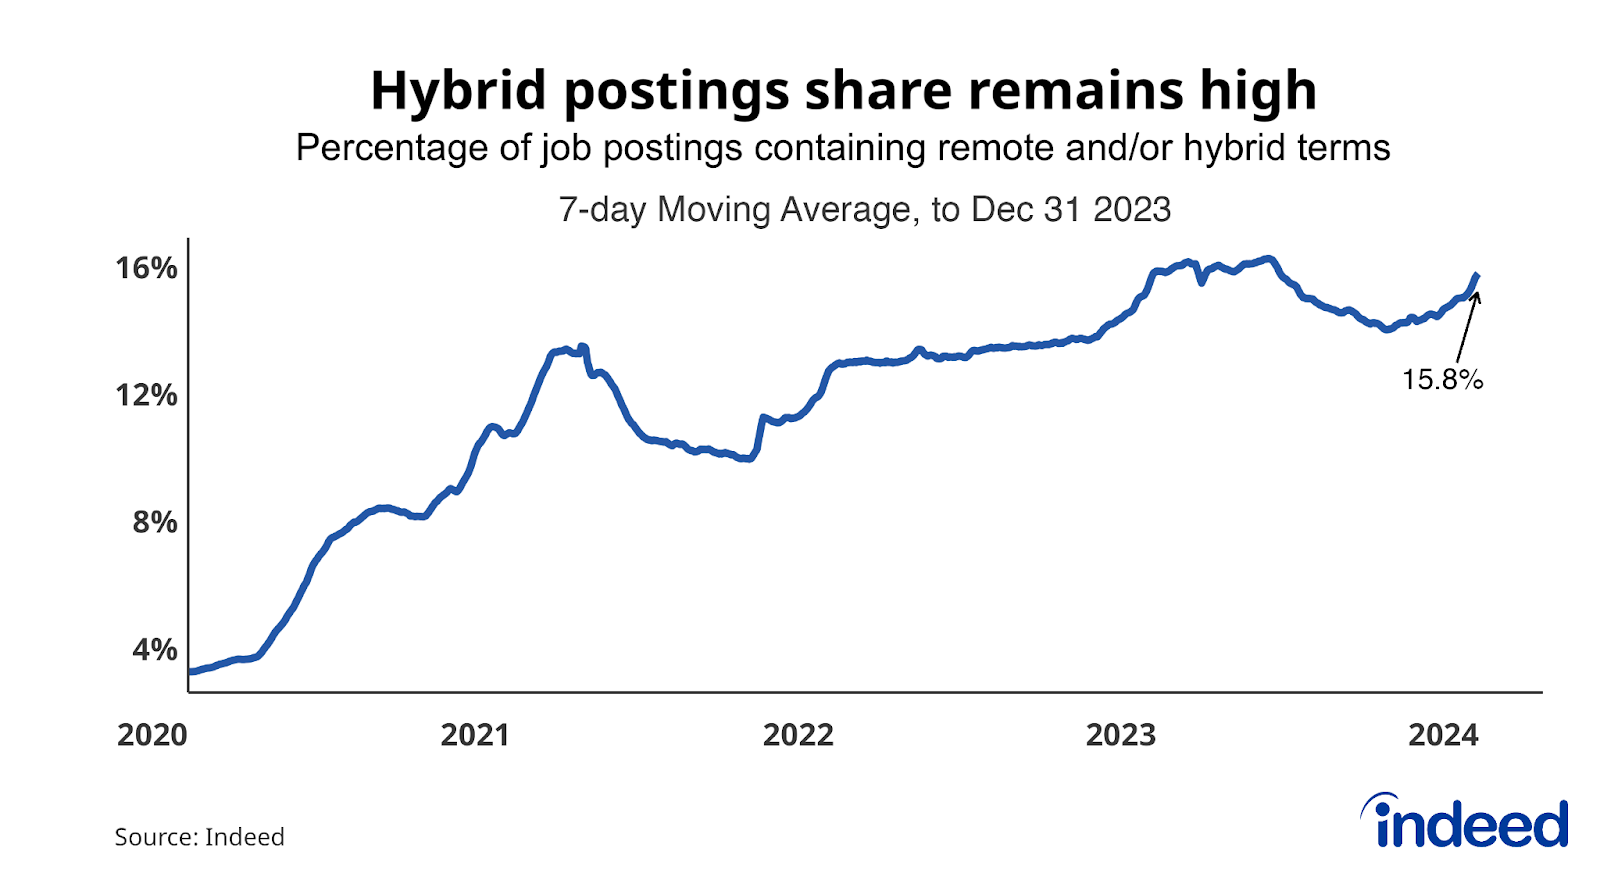 Line chart titled “Hybrid postings share remains high” shows the share of remote/hybrid postings between 2020 and 2023. On 31 December 2023, the remote/hybrid postings share was 15.8%.  